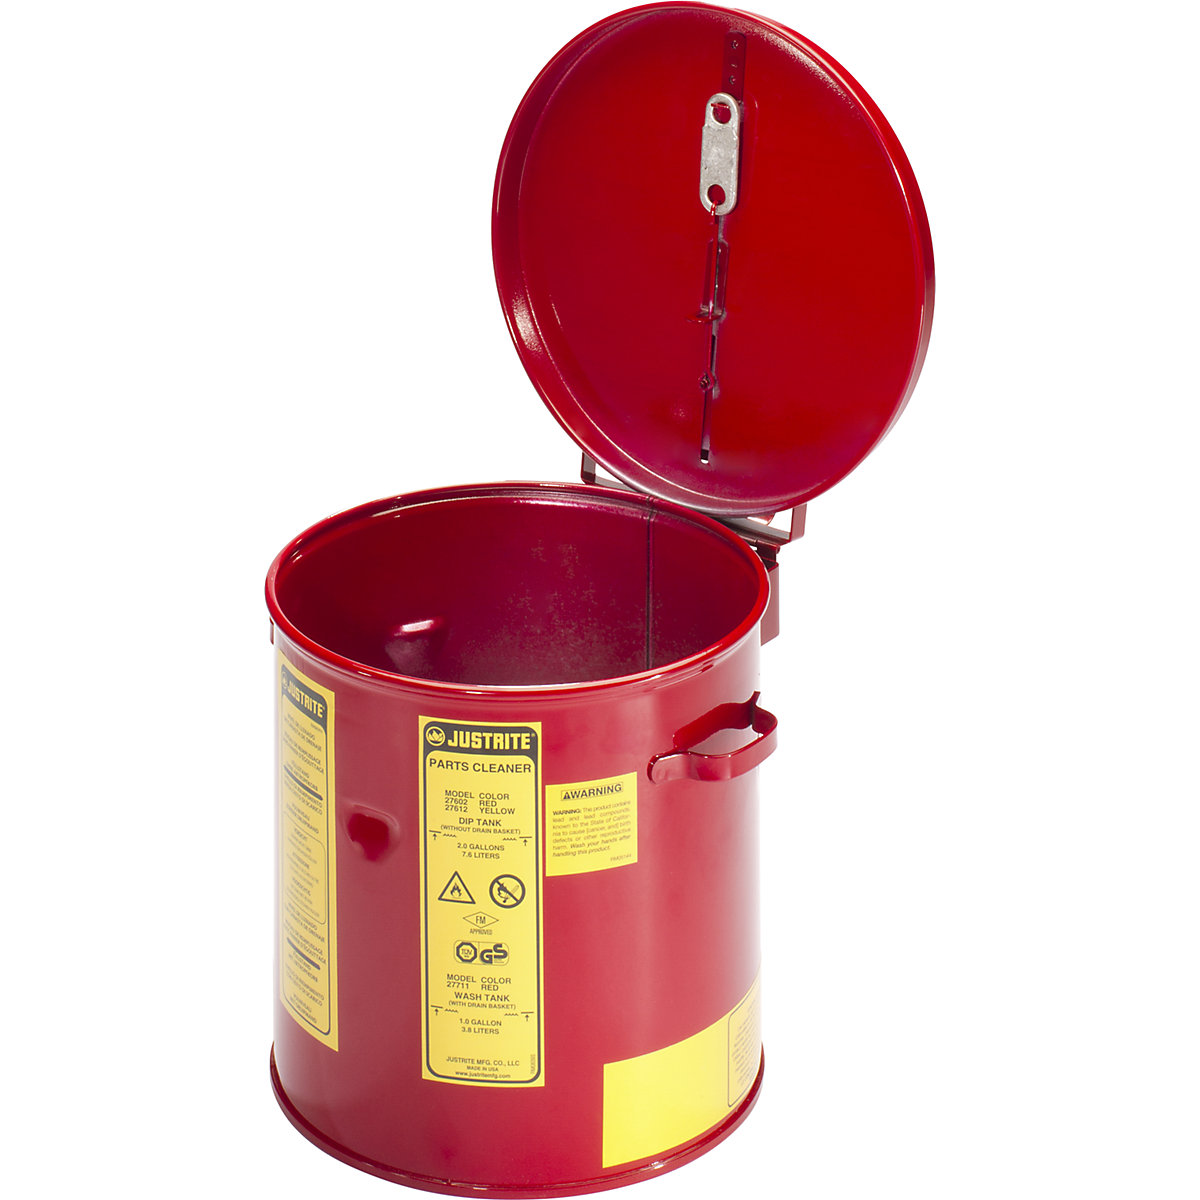 Cleaning and immersion container – Justrite